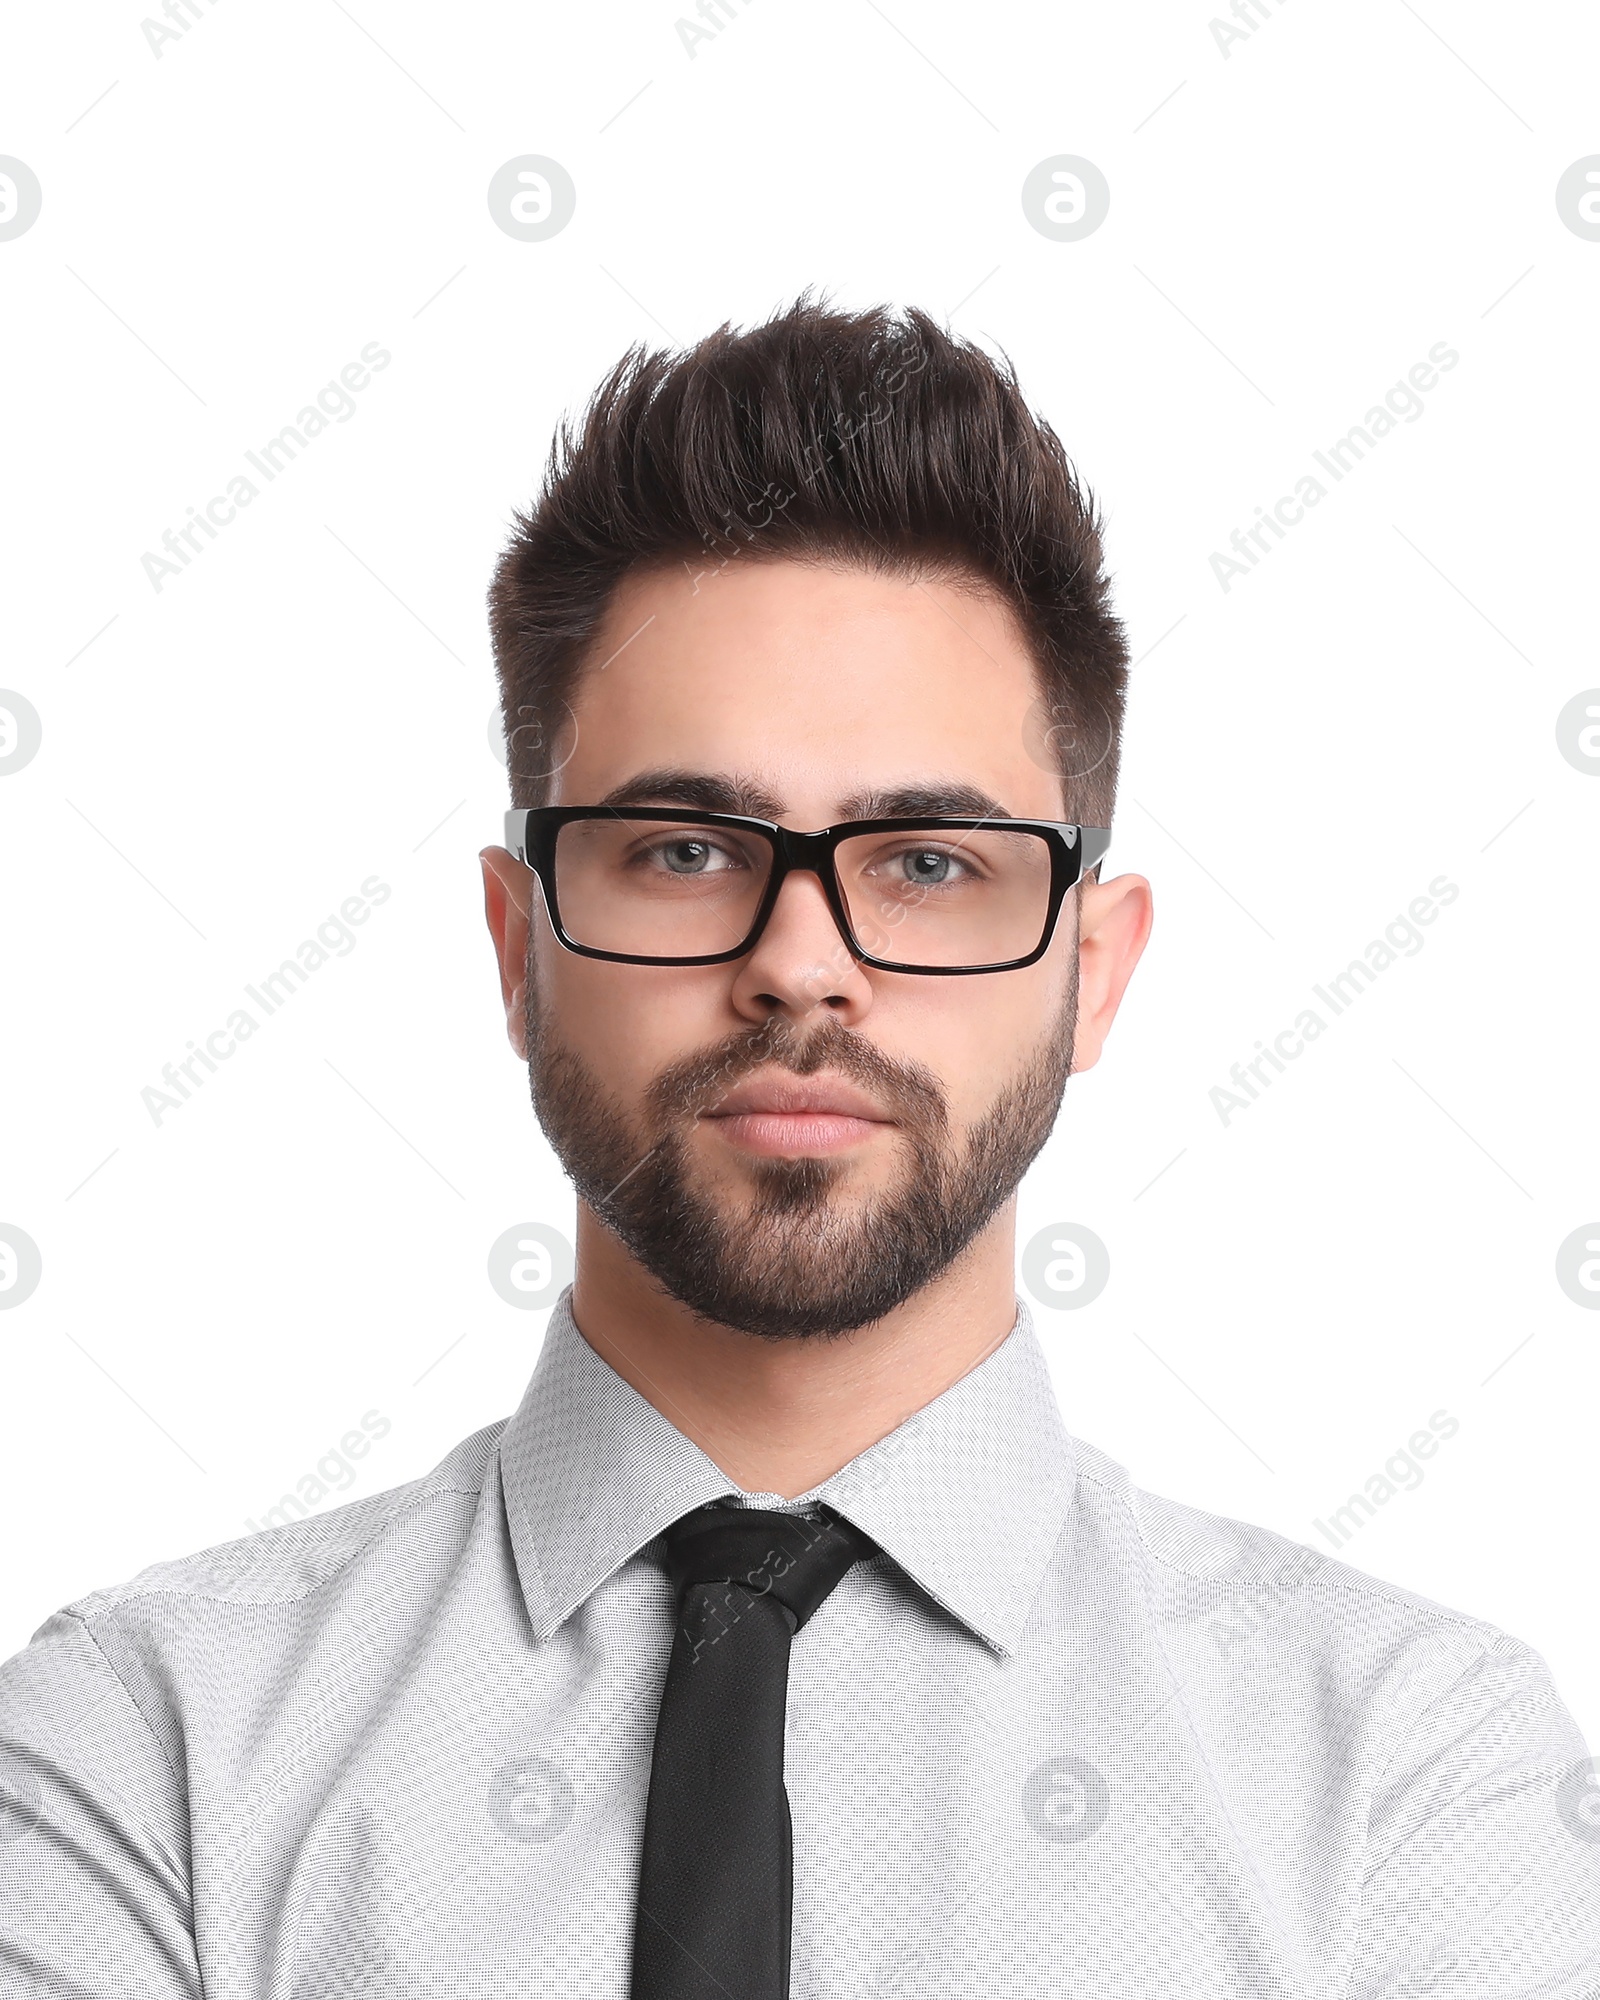 Image of Passport photo. Portrait of young man on white background